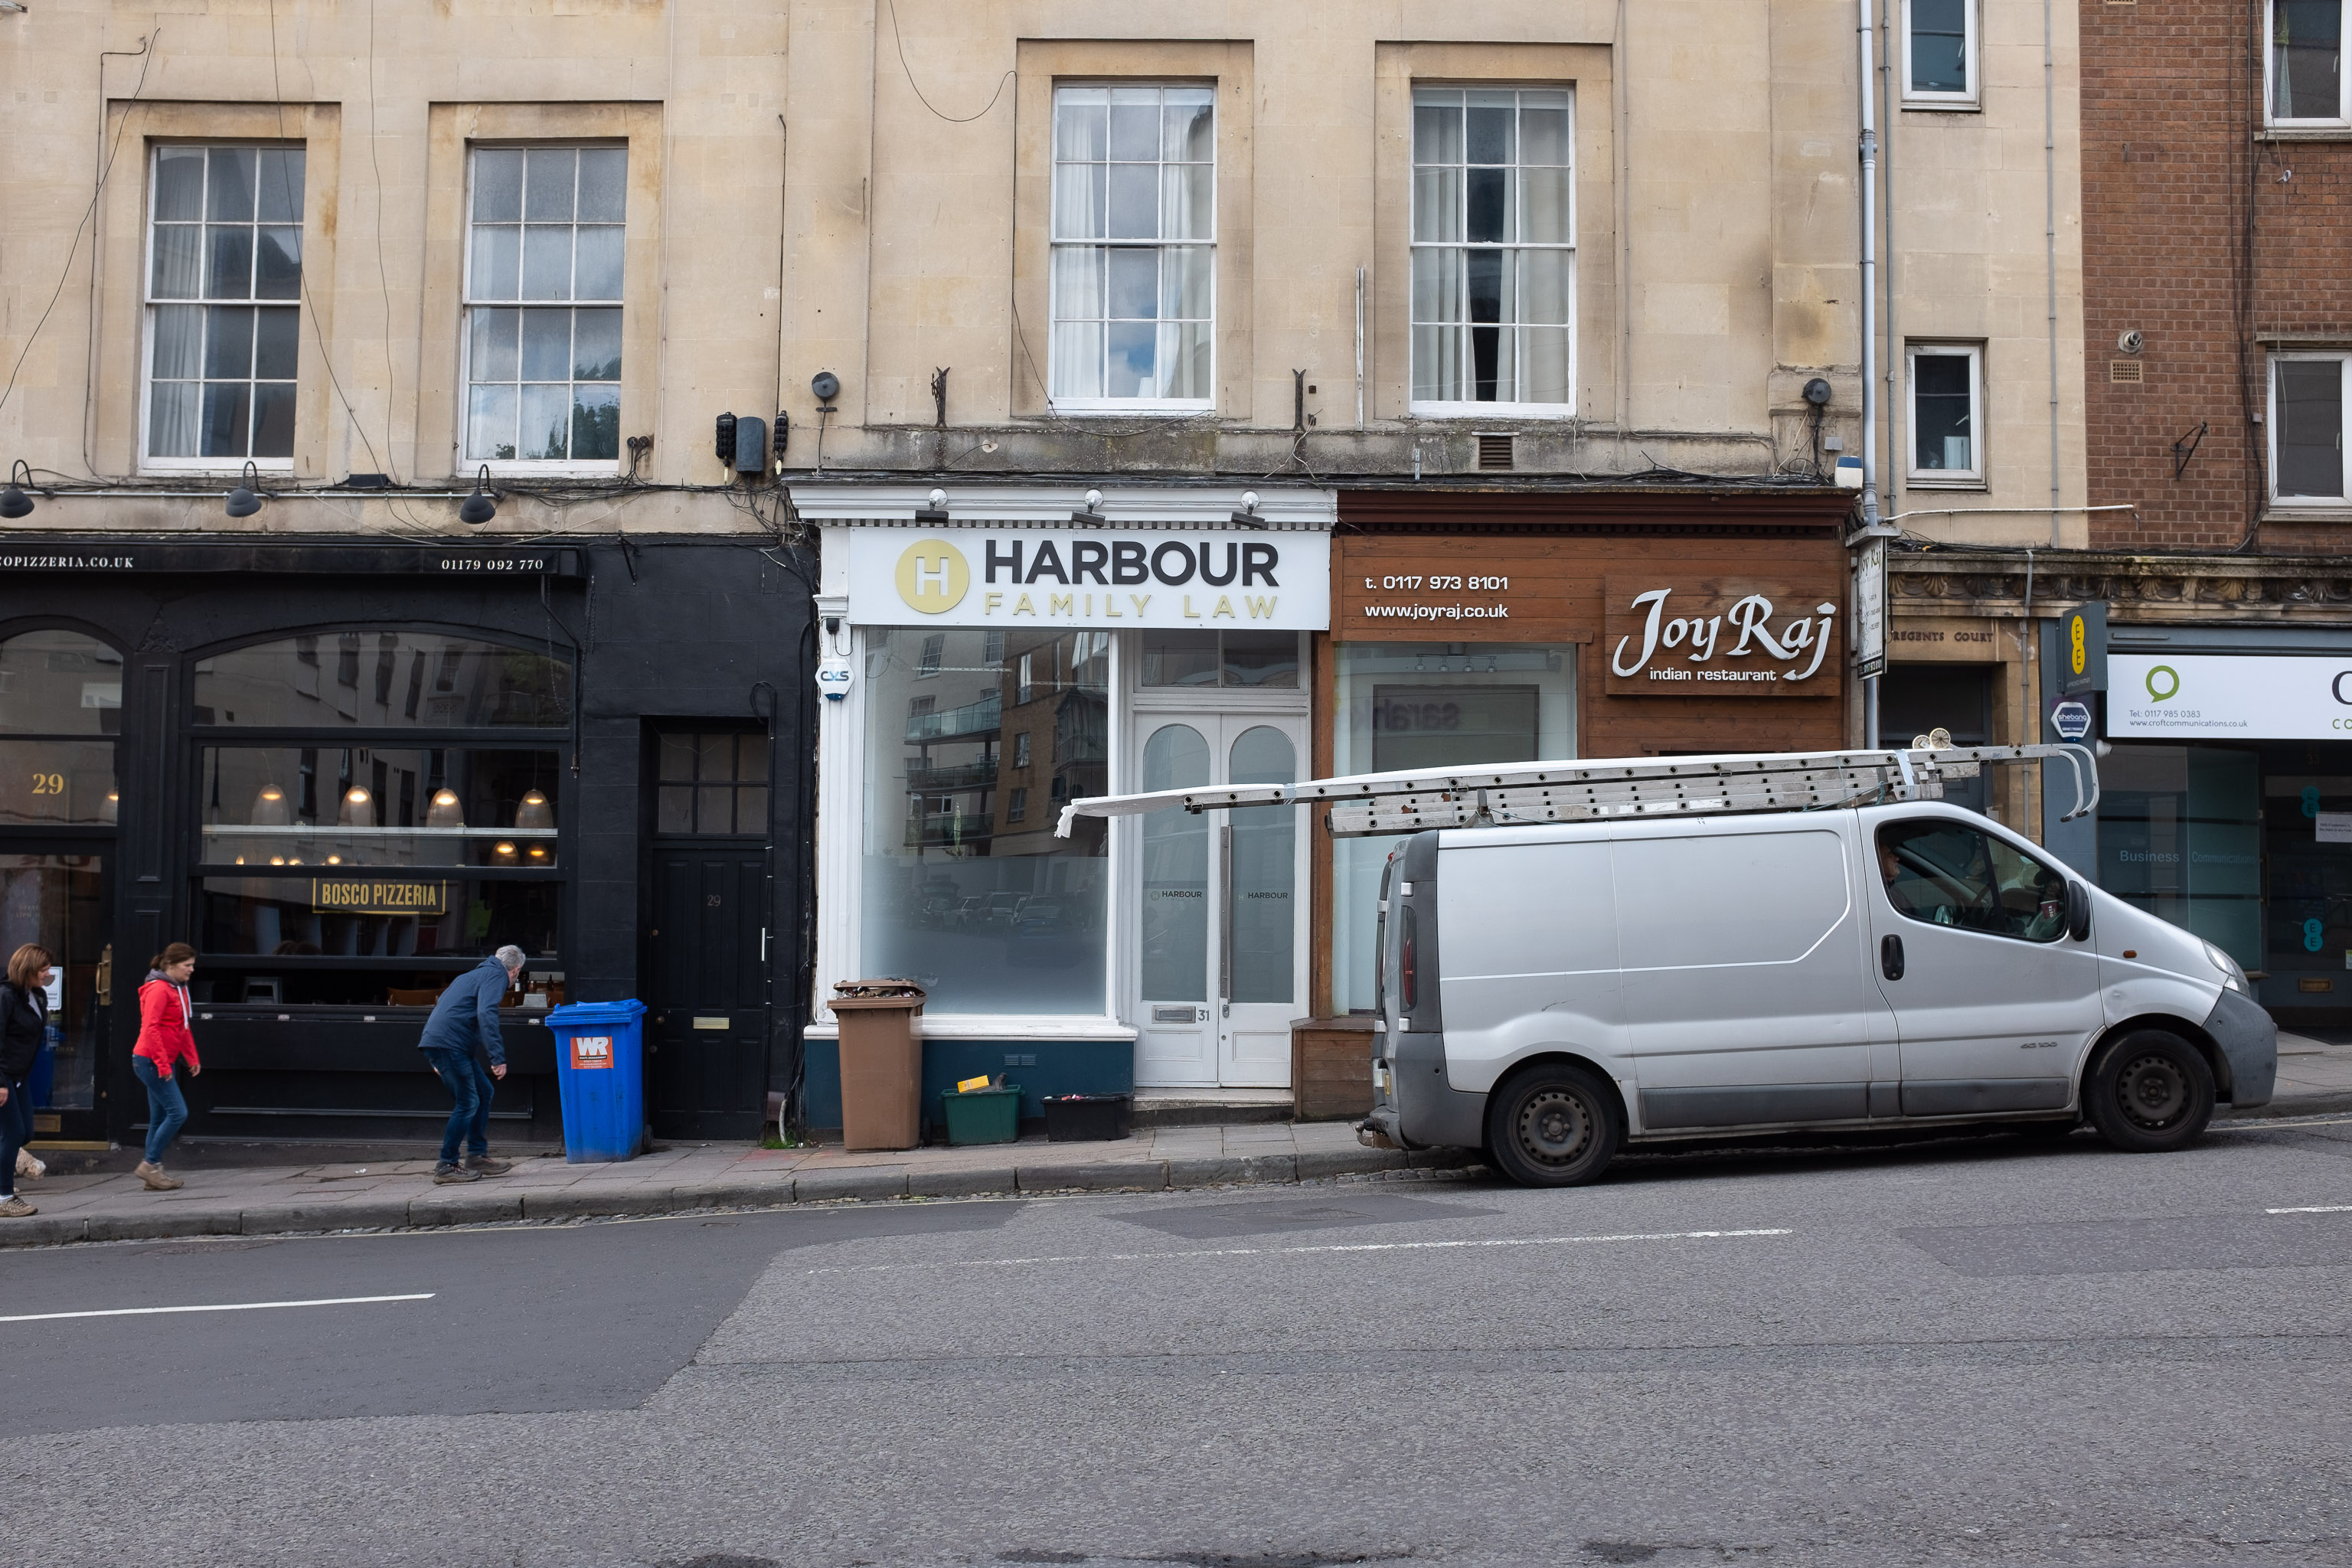 Harbour/Joy
The Joy Raj do good food, from what I remember. I've never had any need for family law. Surprisingly, it was a hairdresser before it was a law firm.
